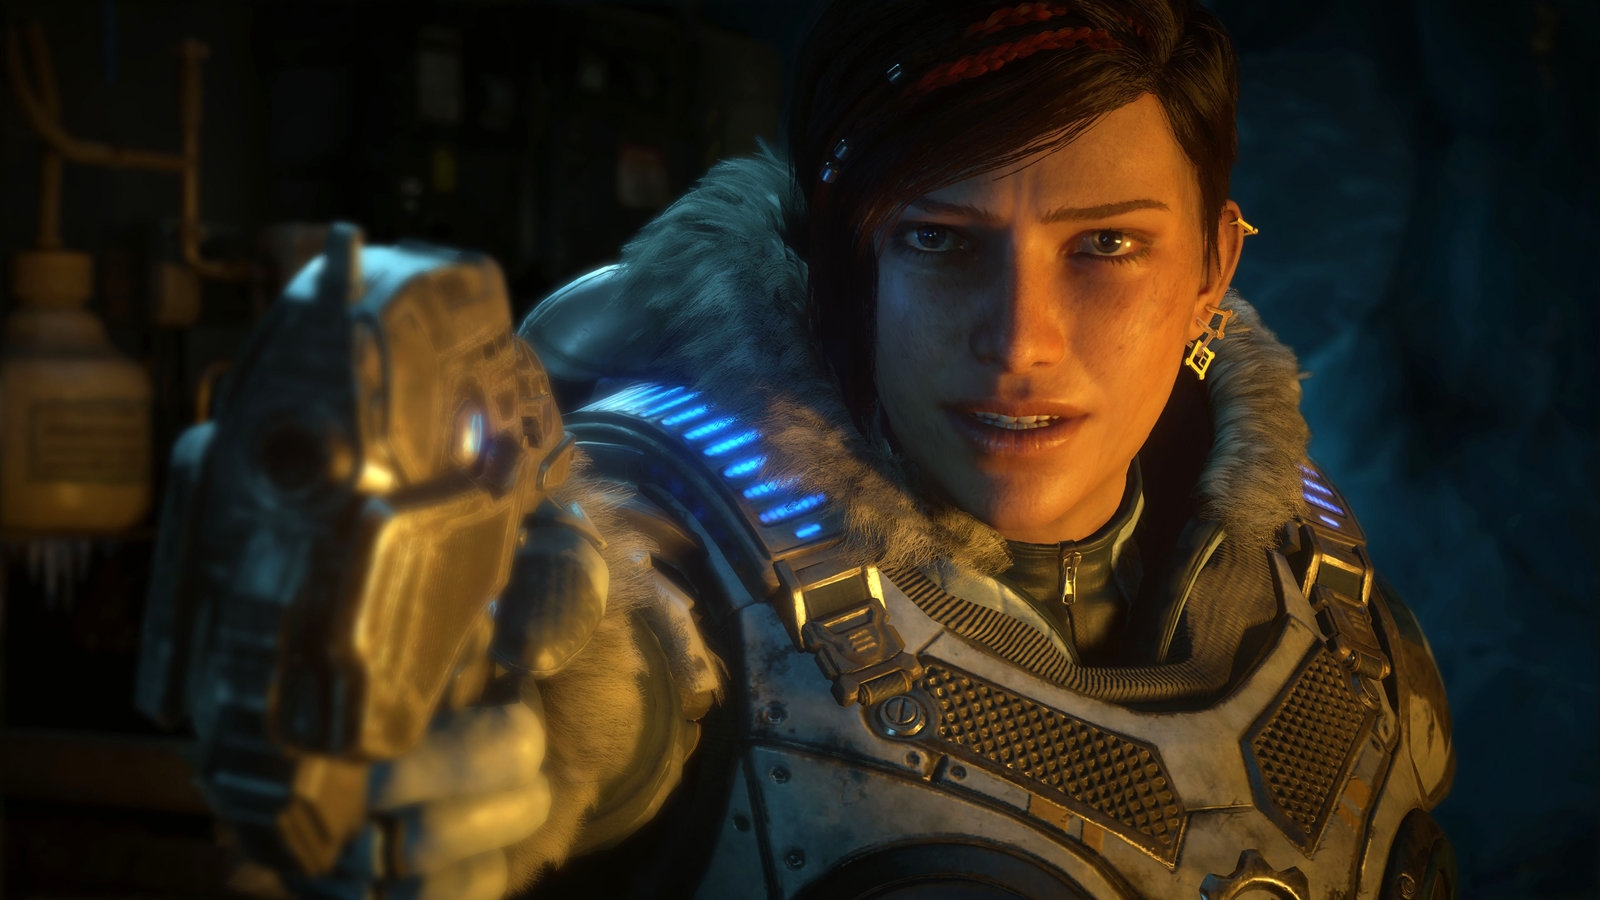 'Gears 5' will add new modes and maps in its first six months | DeviceDaily.com